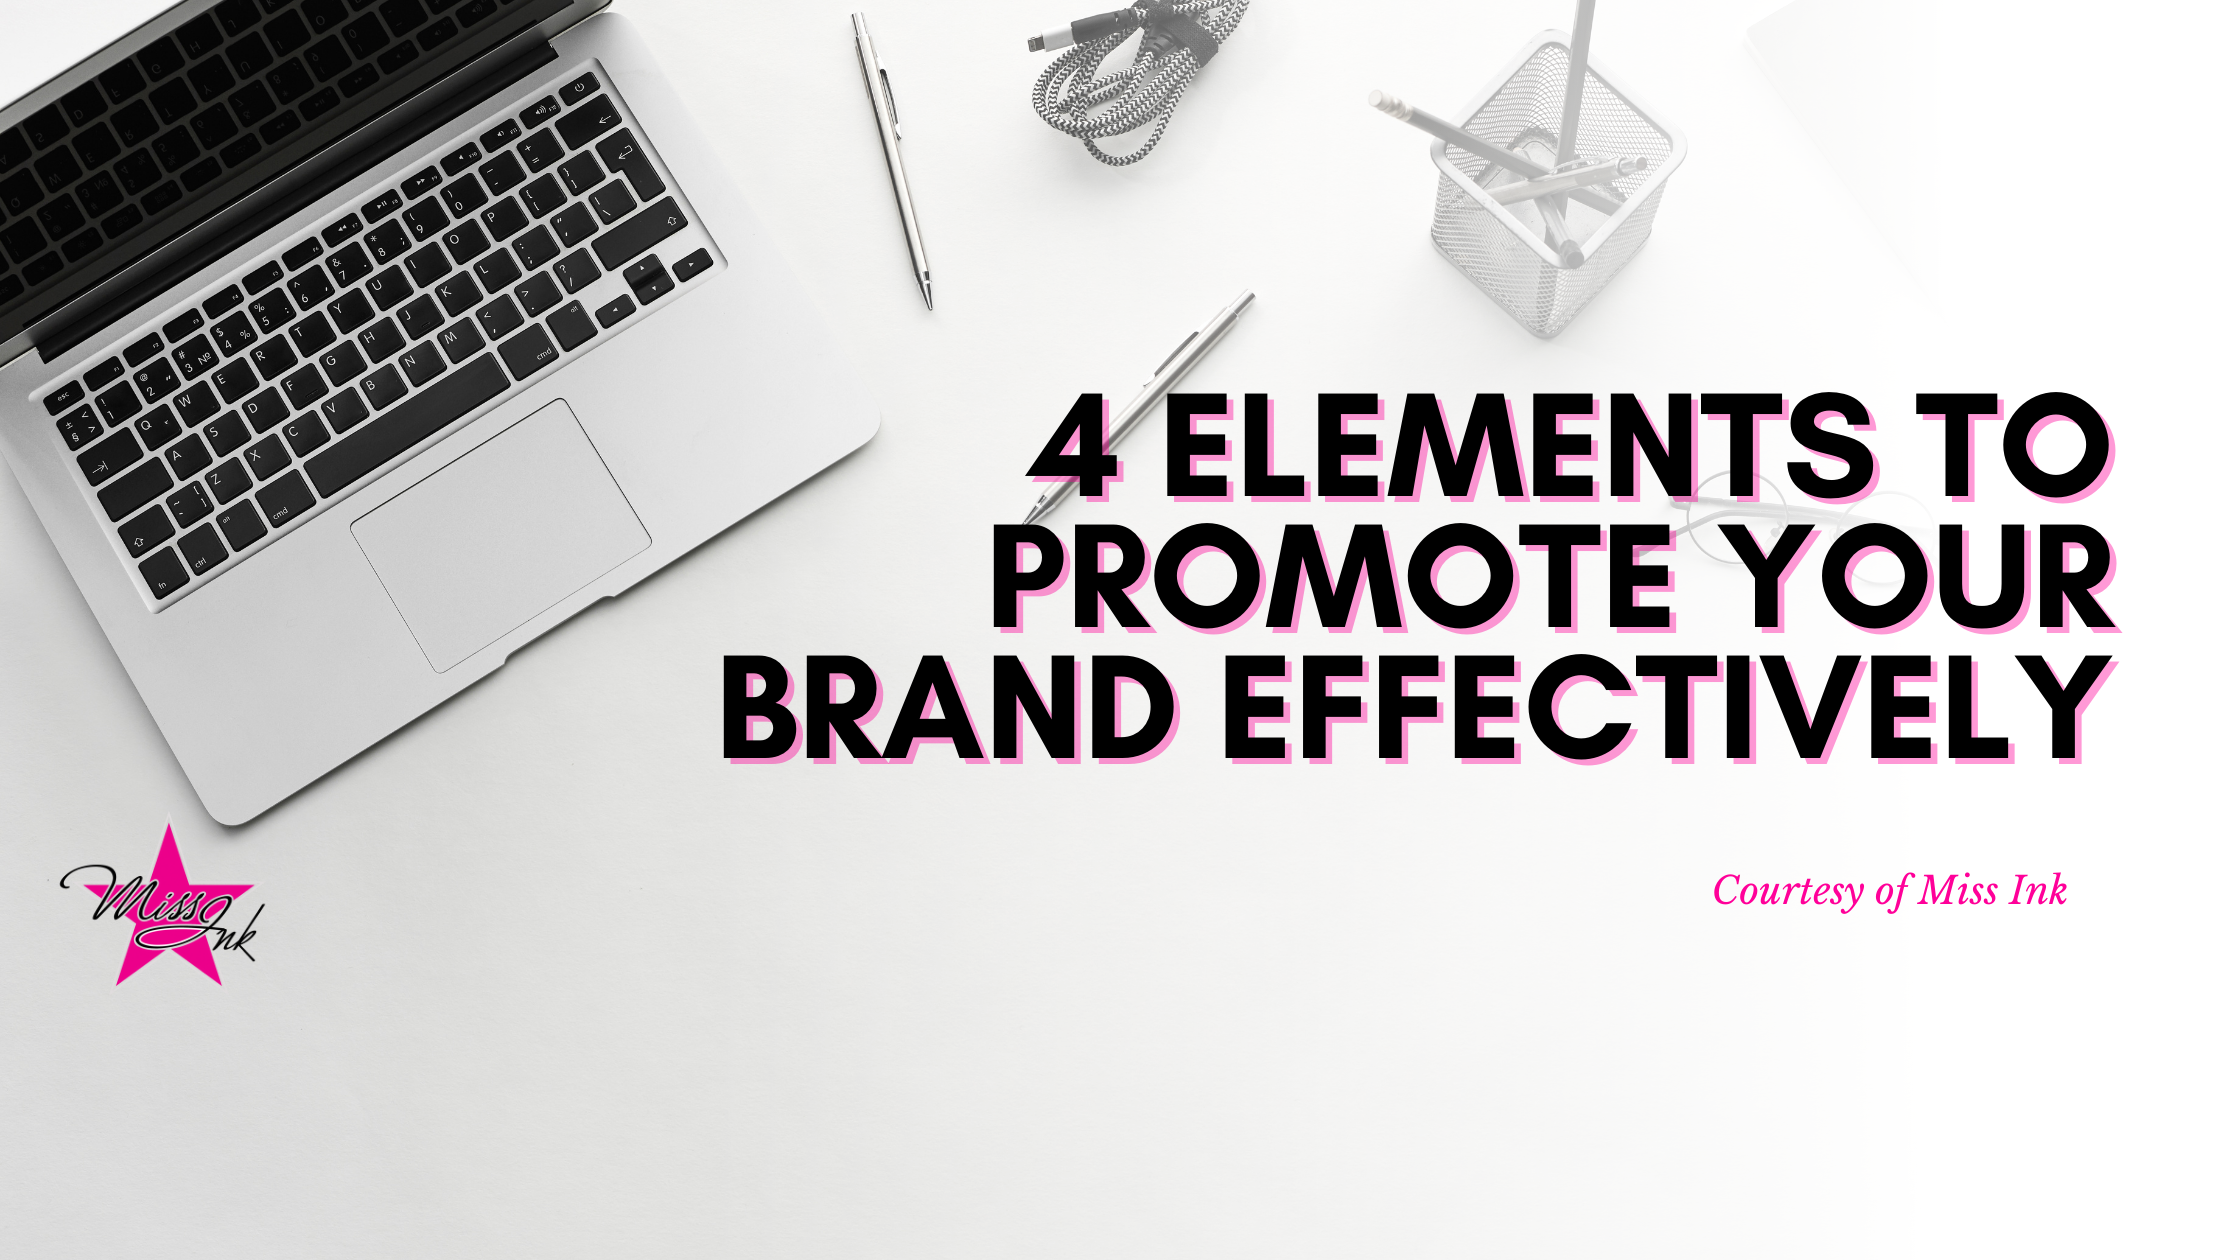 4 Elements To Promote Your Brand Effectively. 